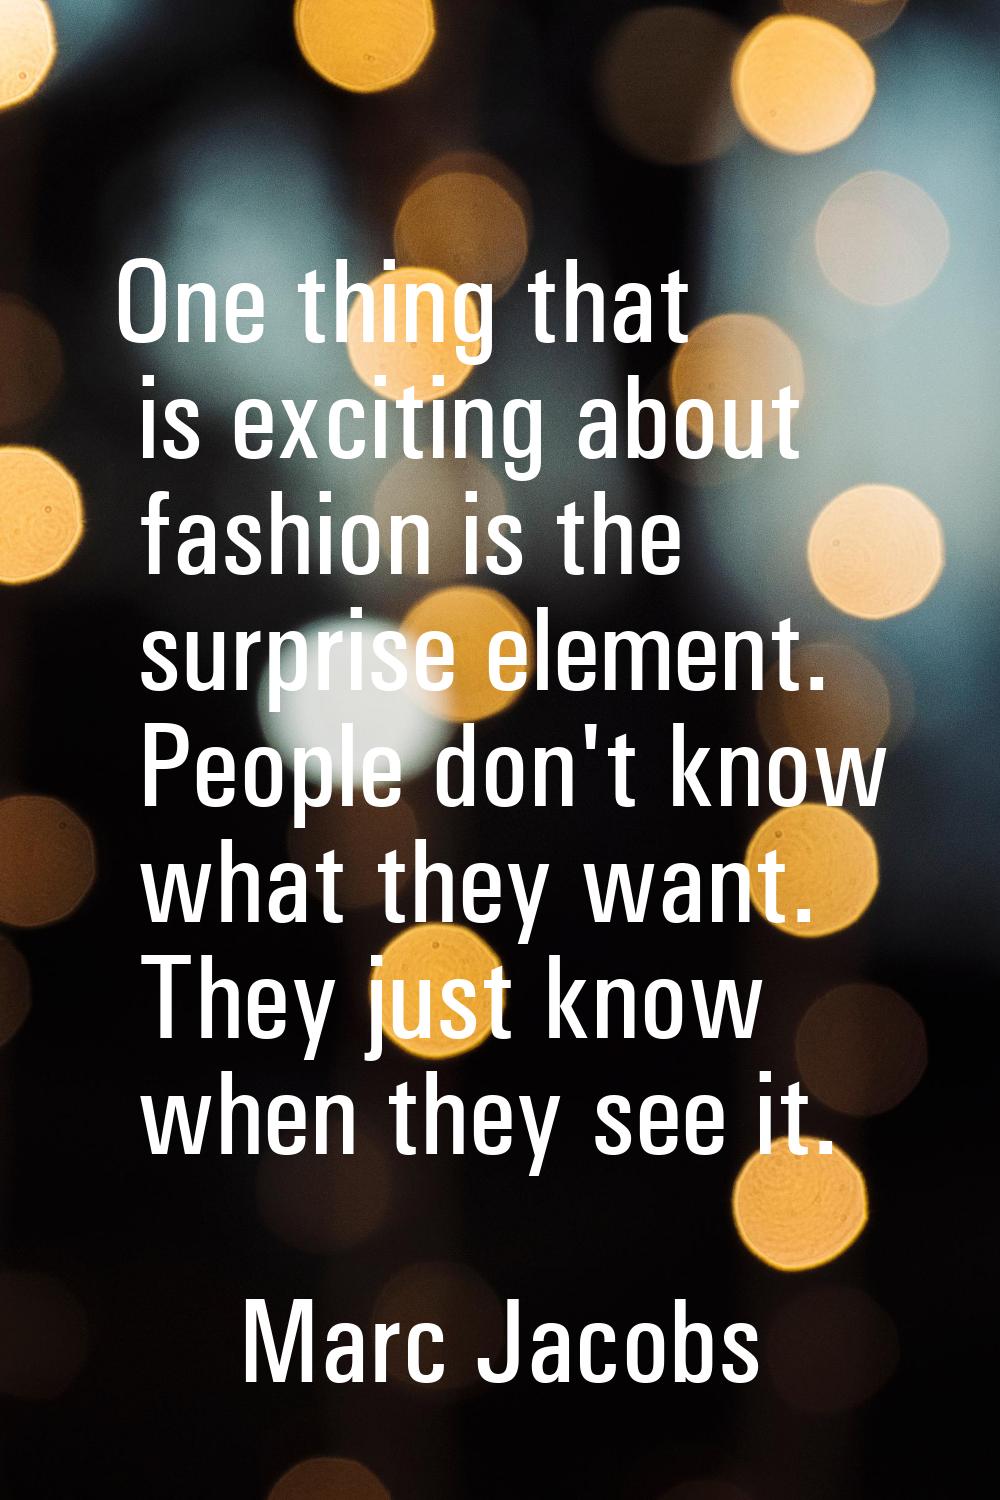 One thing that is exciting about fashion is the surprise element. People don't know what they want.